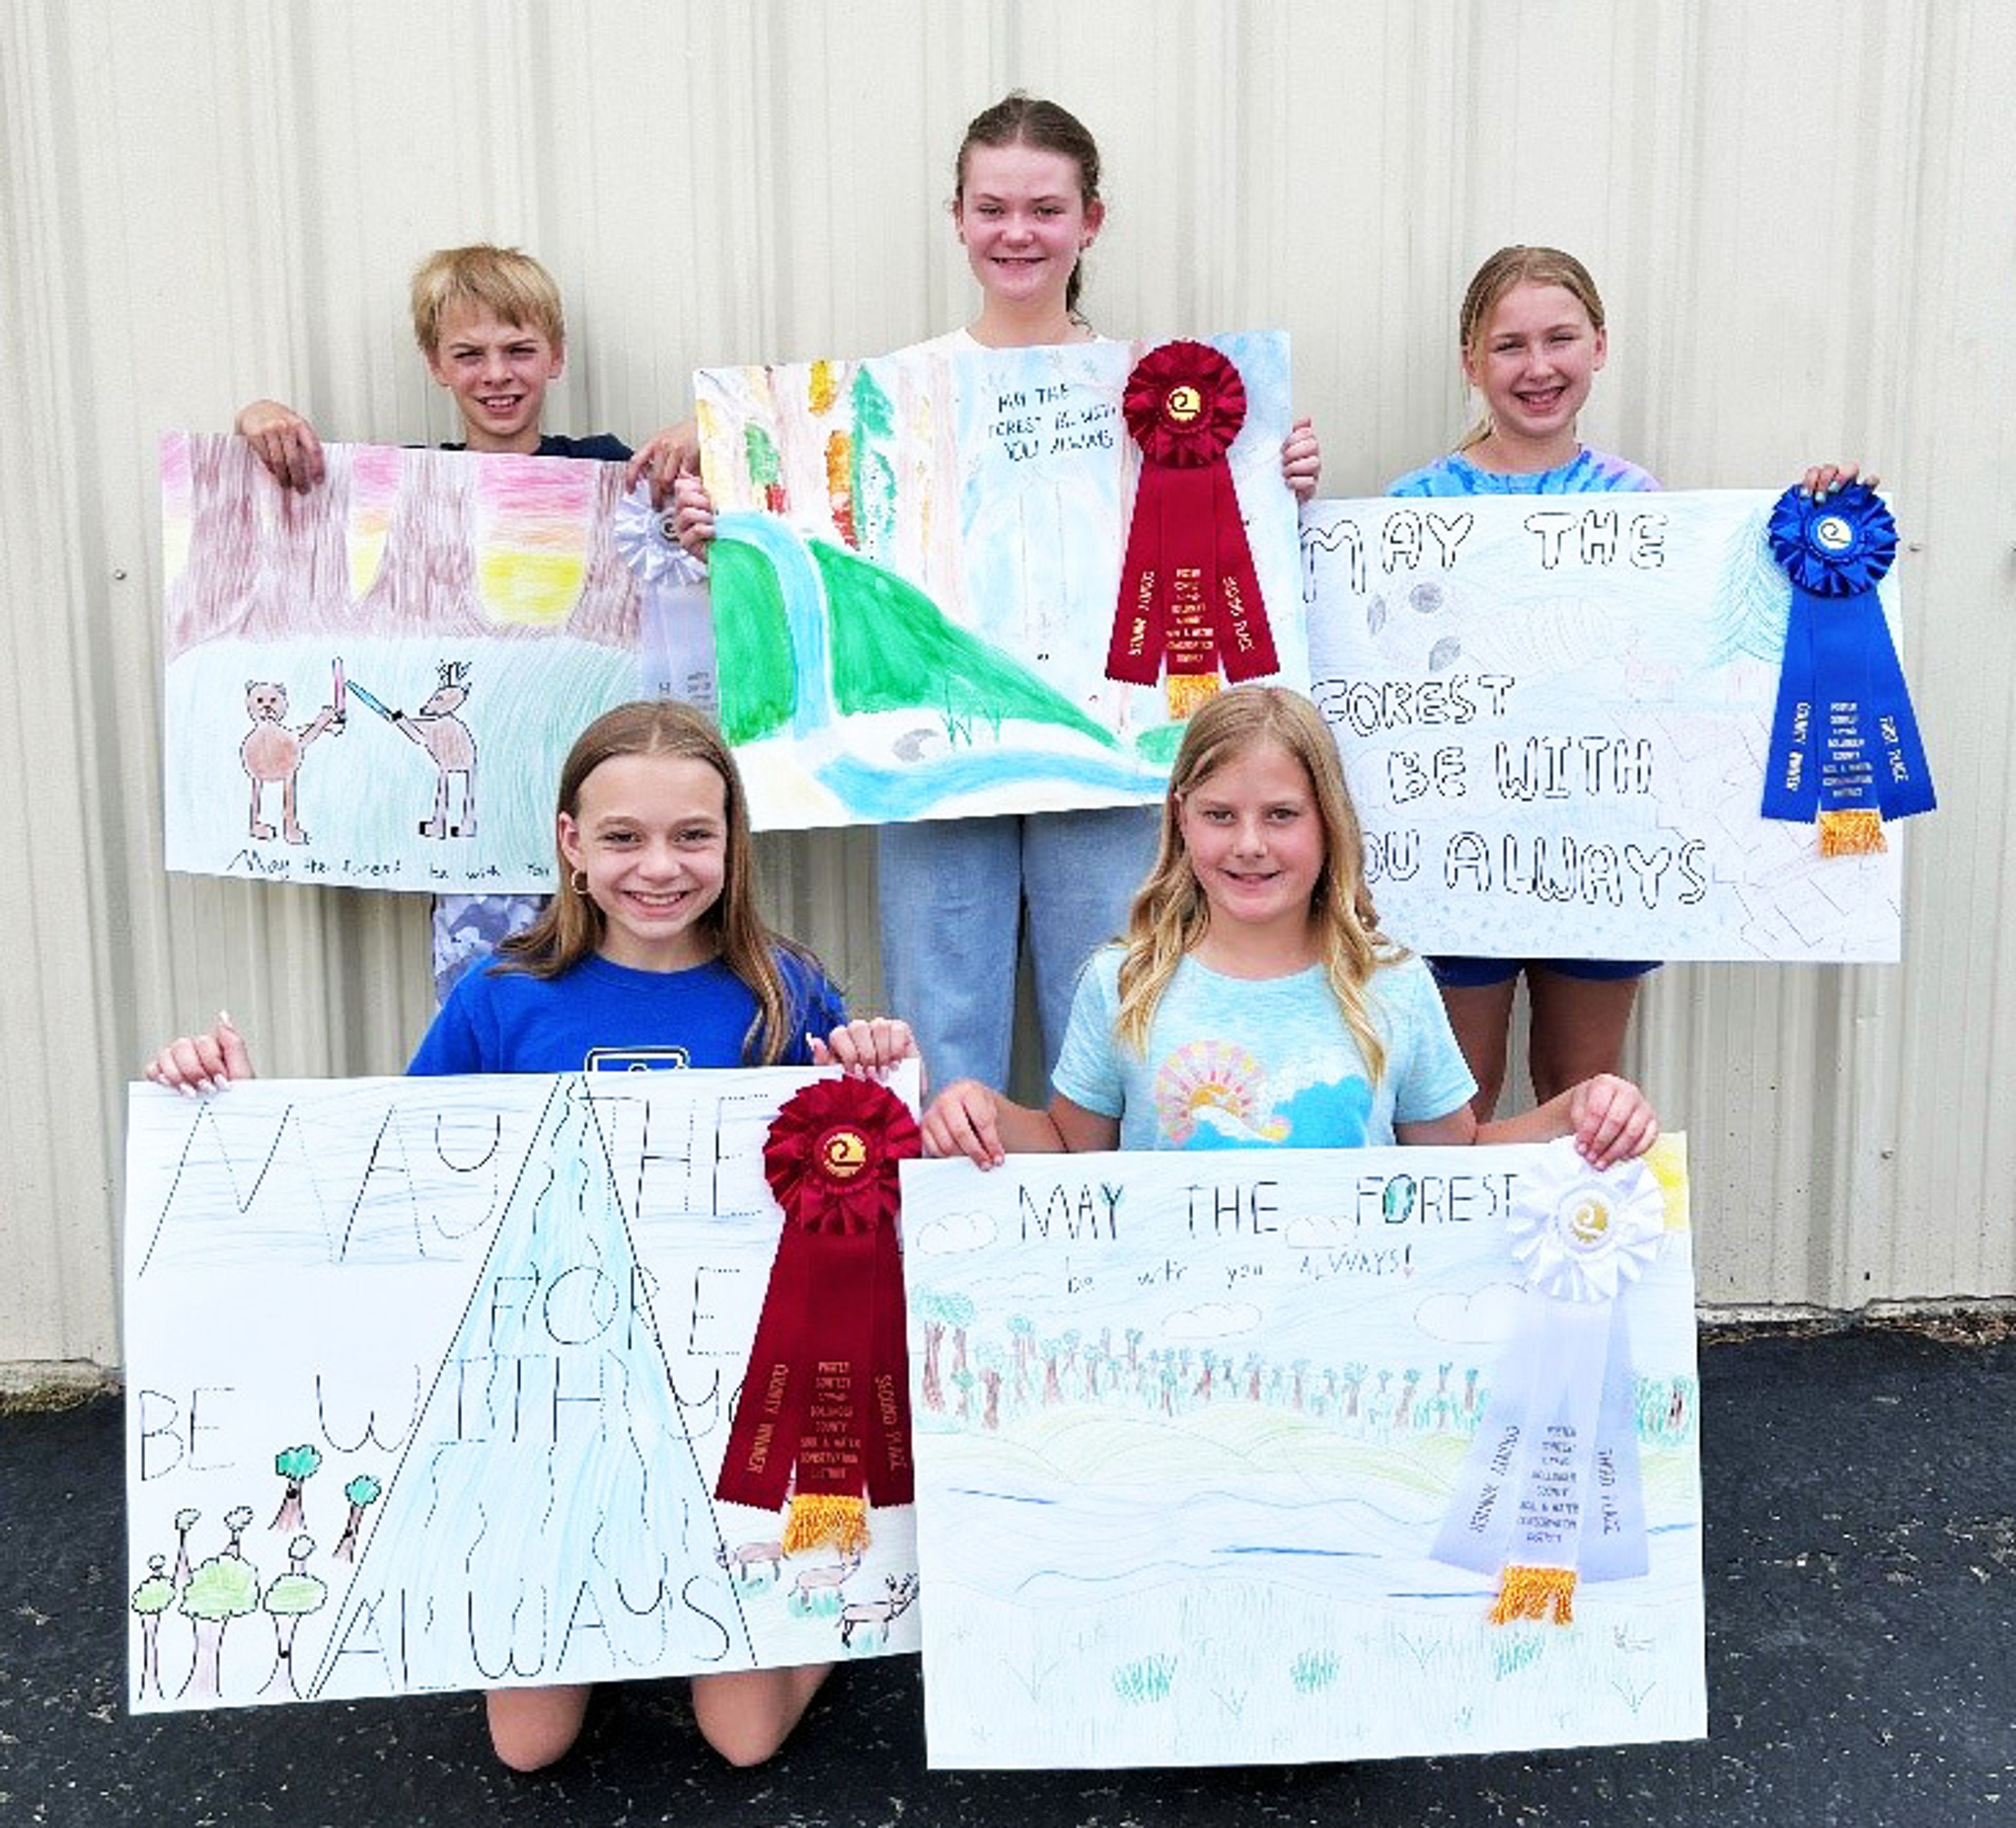 Winners from Leopold (front row, from left) include Addison Arnzen, fifth grade, second place; and Juliet Booth, fourth grade, third place; and (back row, from left) Jaxon Fluchel, fifth grade, third place; Kynlee Martin, sixth grade, second place; and Nellie Langston, fourth grade, first place.
